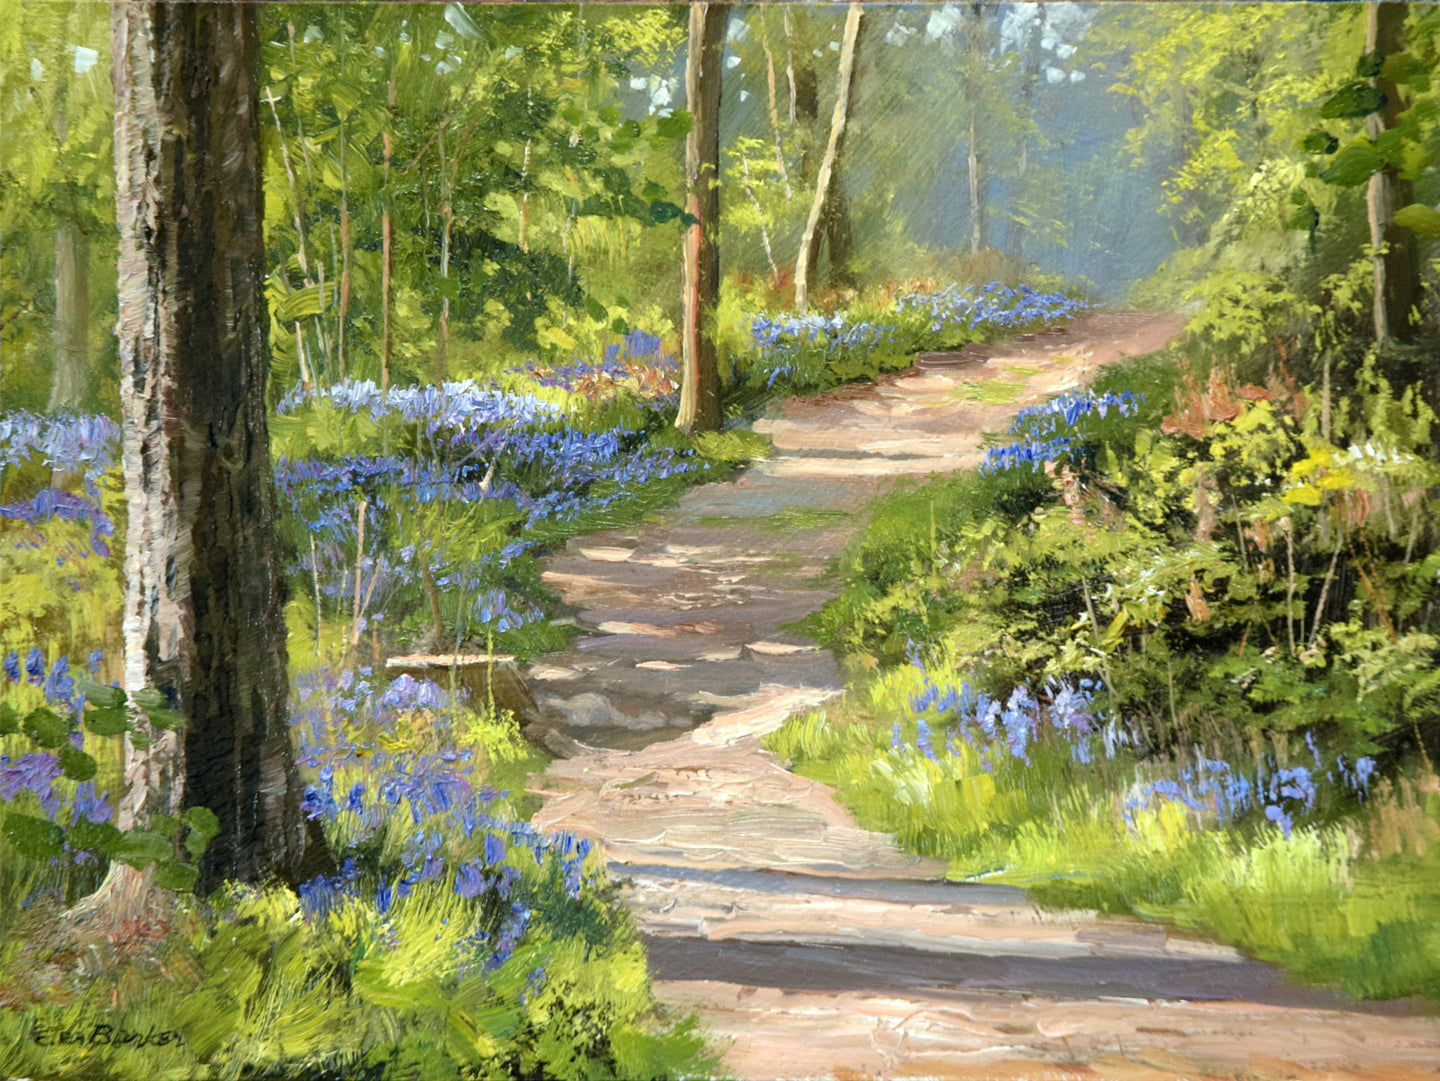 6 x 8 inch oil painting of a curling path at wakerley Wood, with Bluebells abounding on both sides.